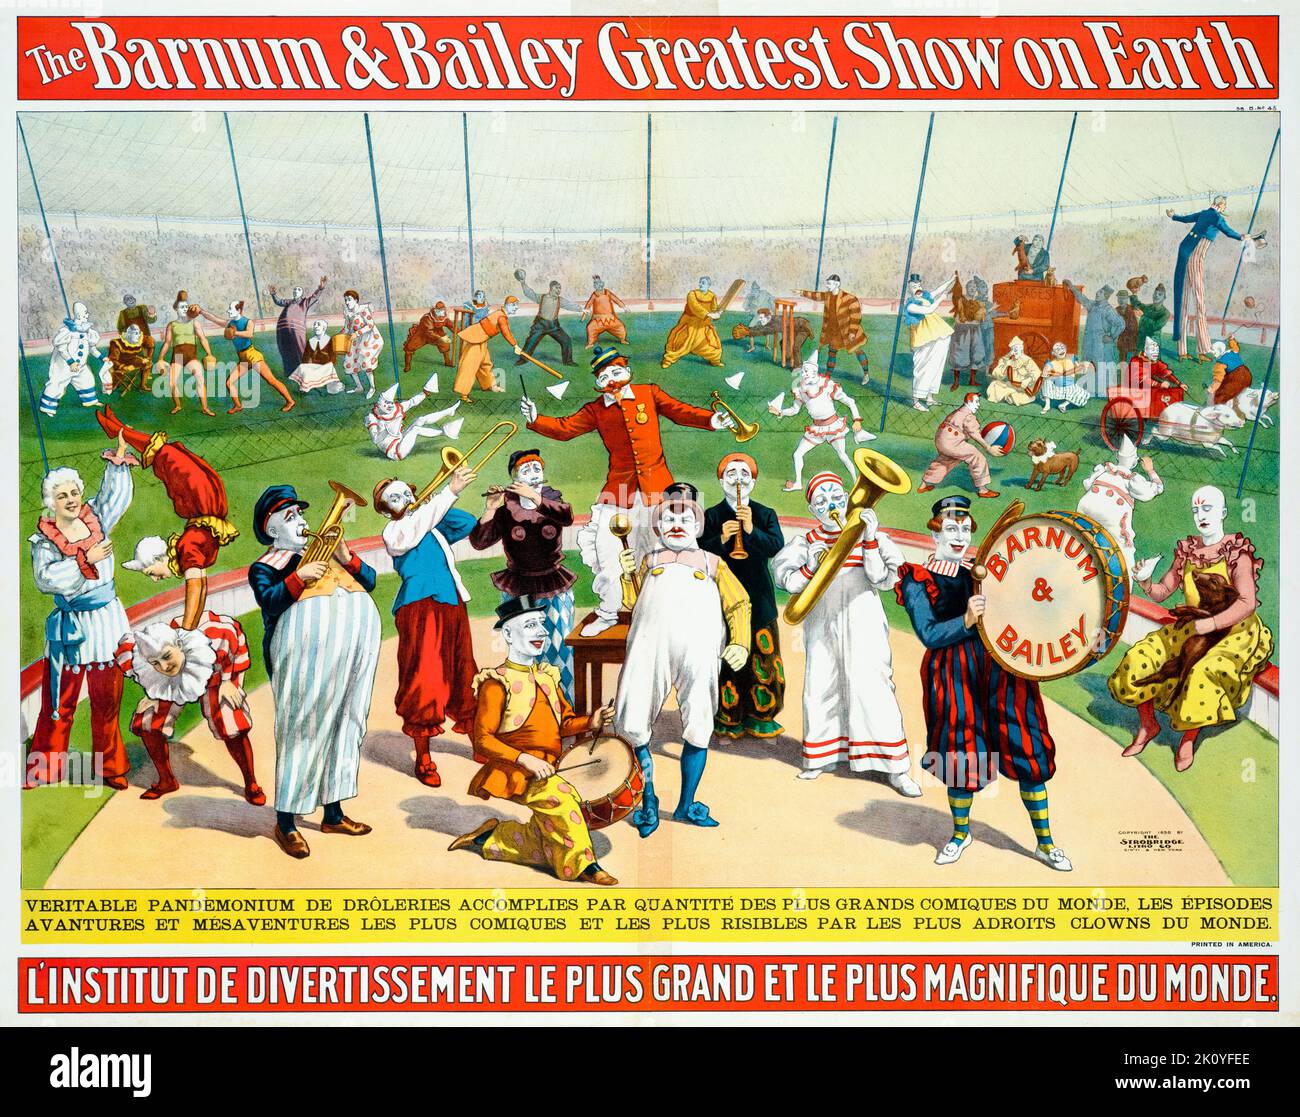 The Barnum & Bailey Greatest Show on Earth, Circus Poster in French,  by Strobridge Lithograph Company, 1898 Stock Photo